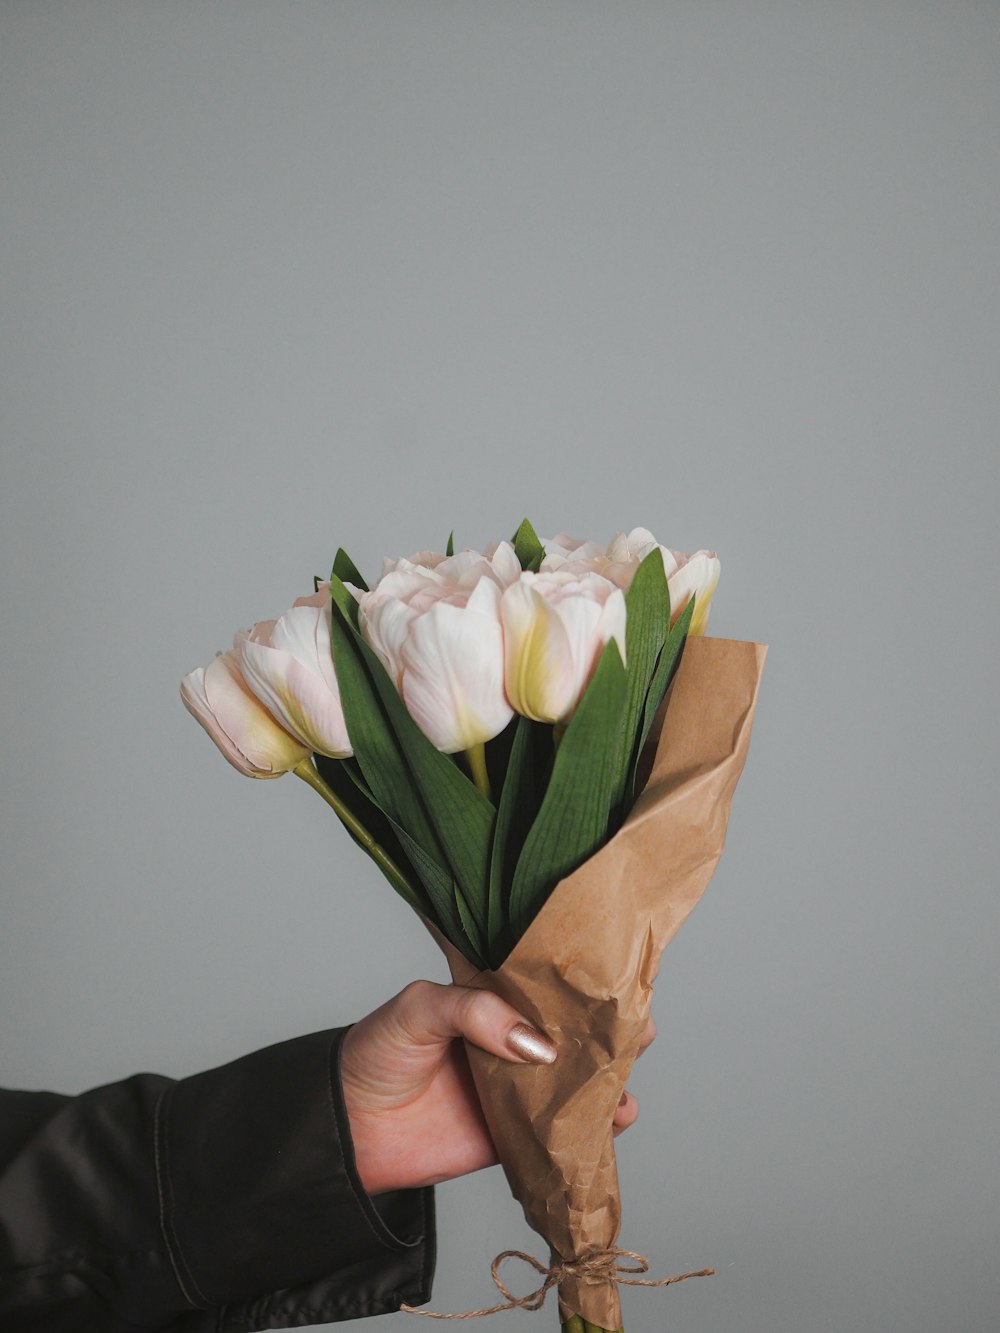 a person holding a bouquet of white tulips